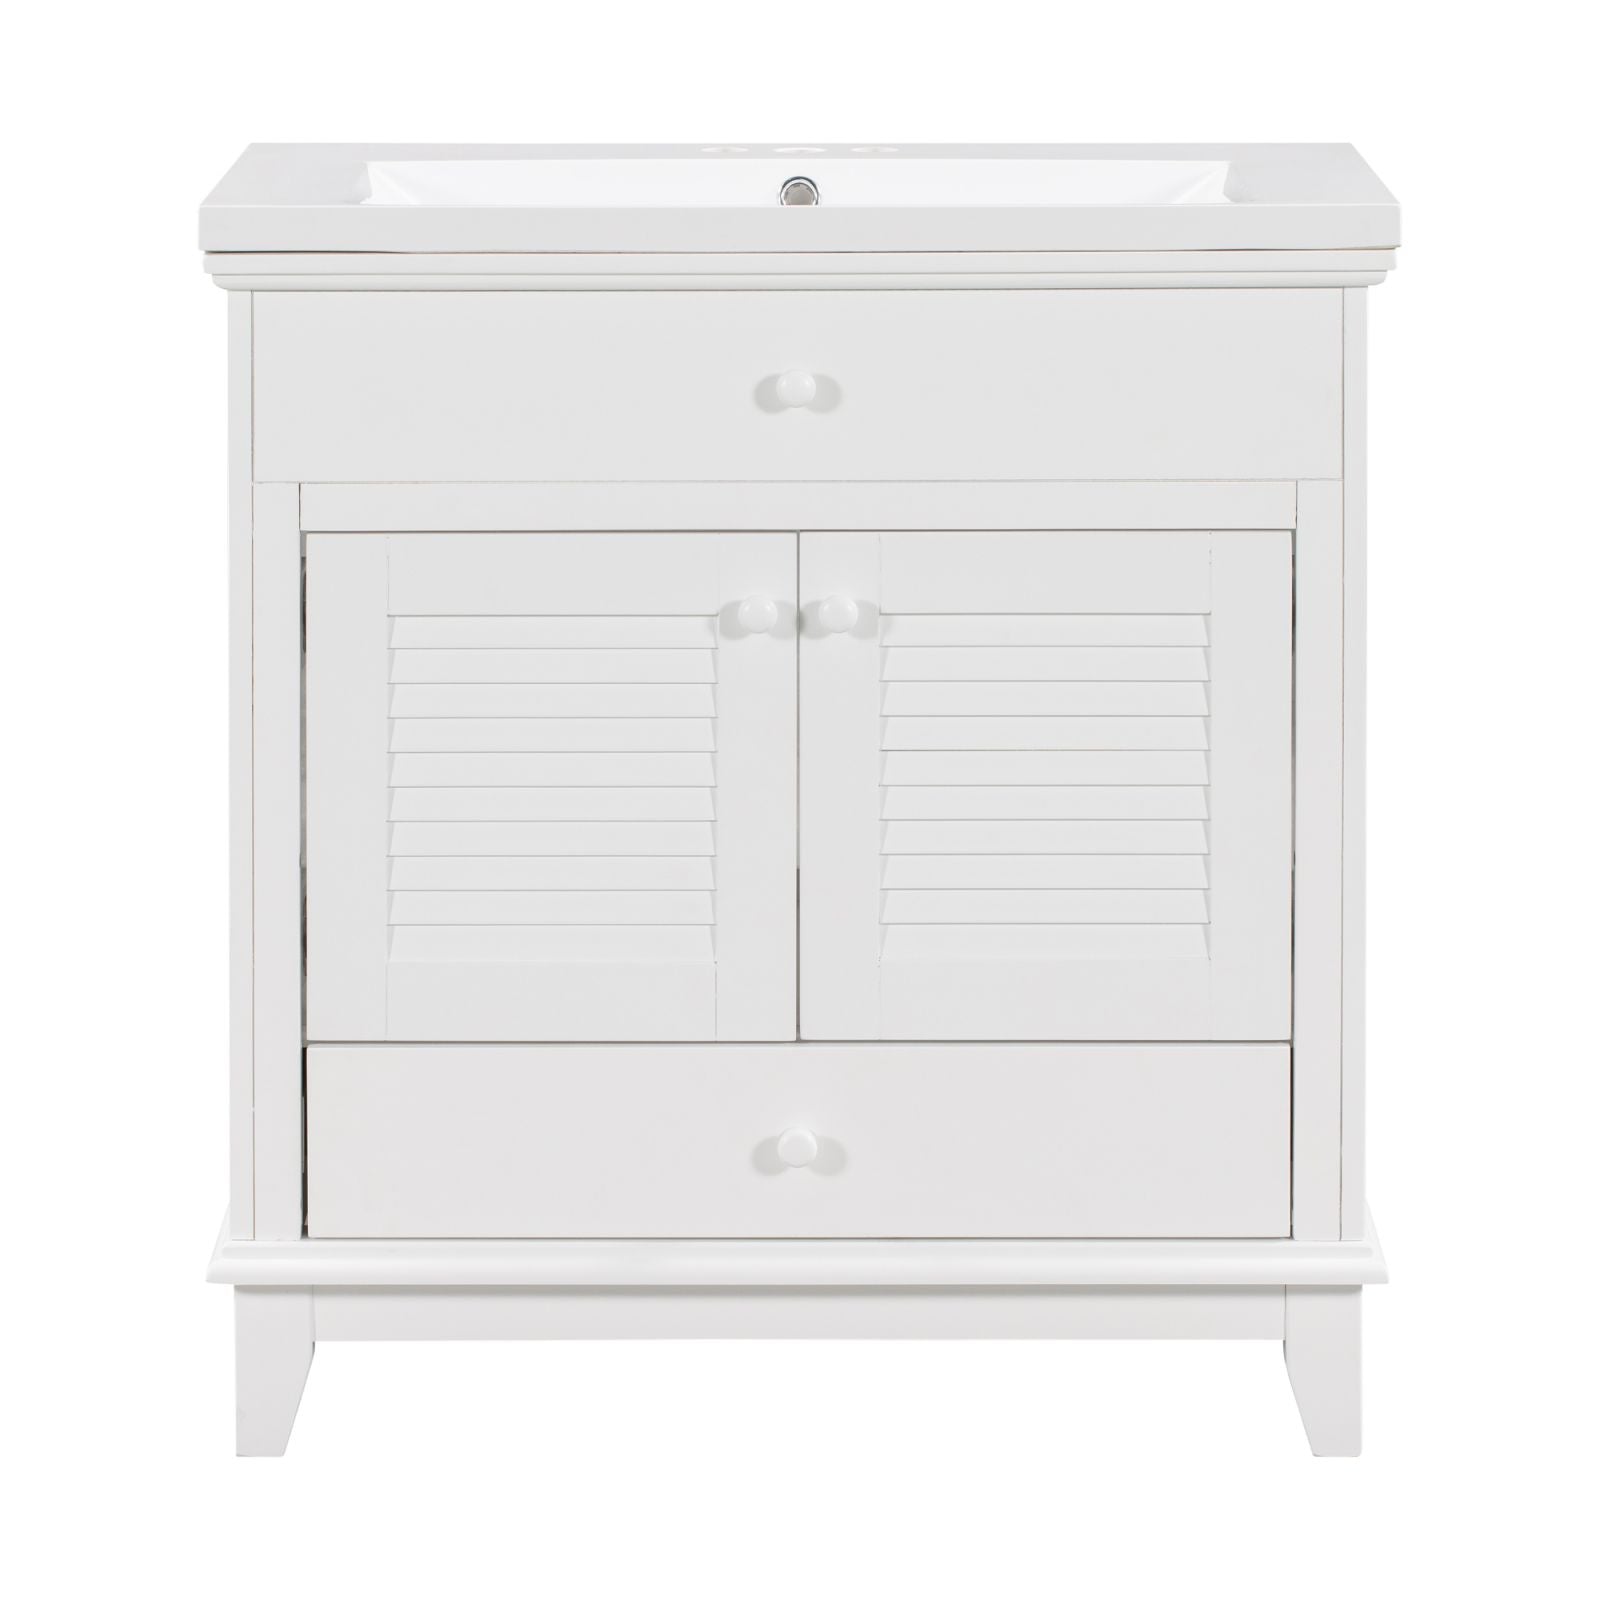 White spacious drawer standalone cabinet